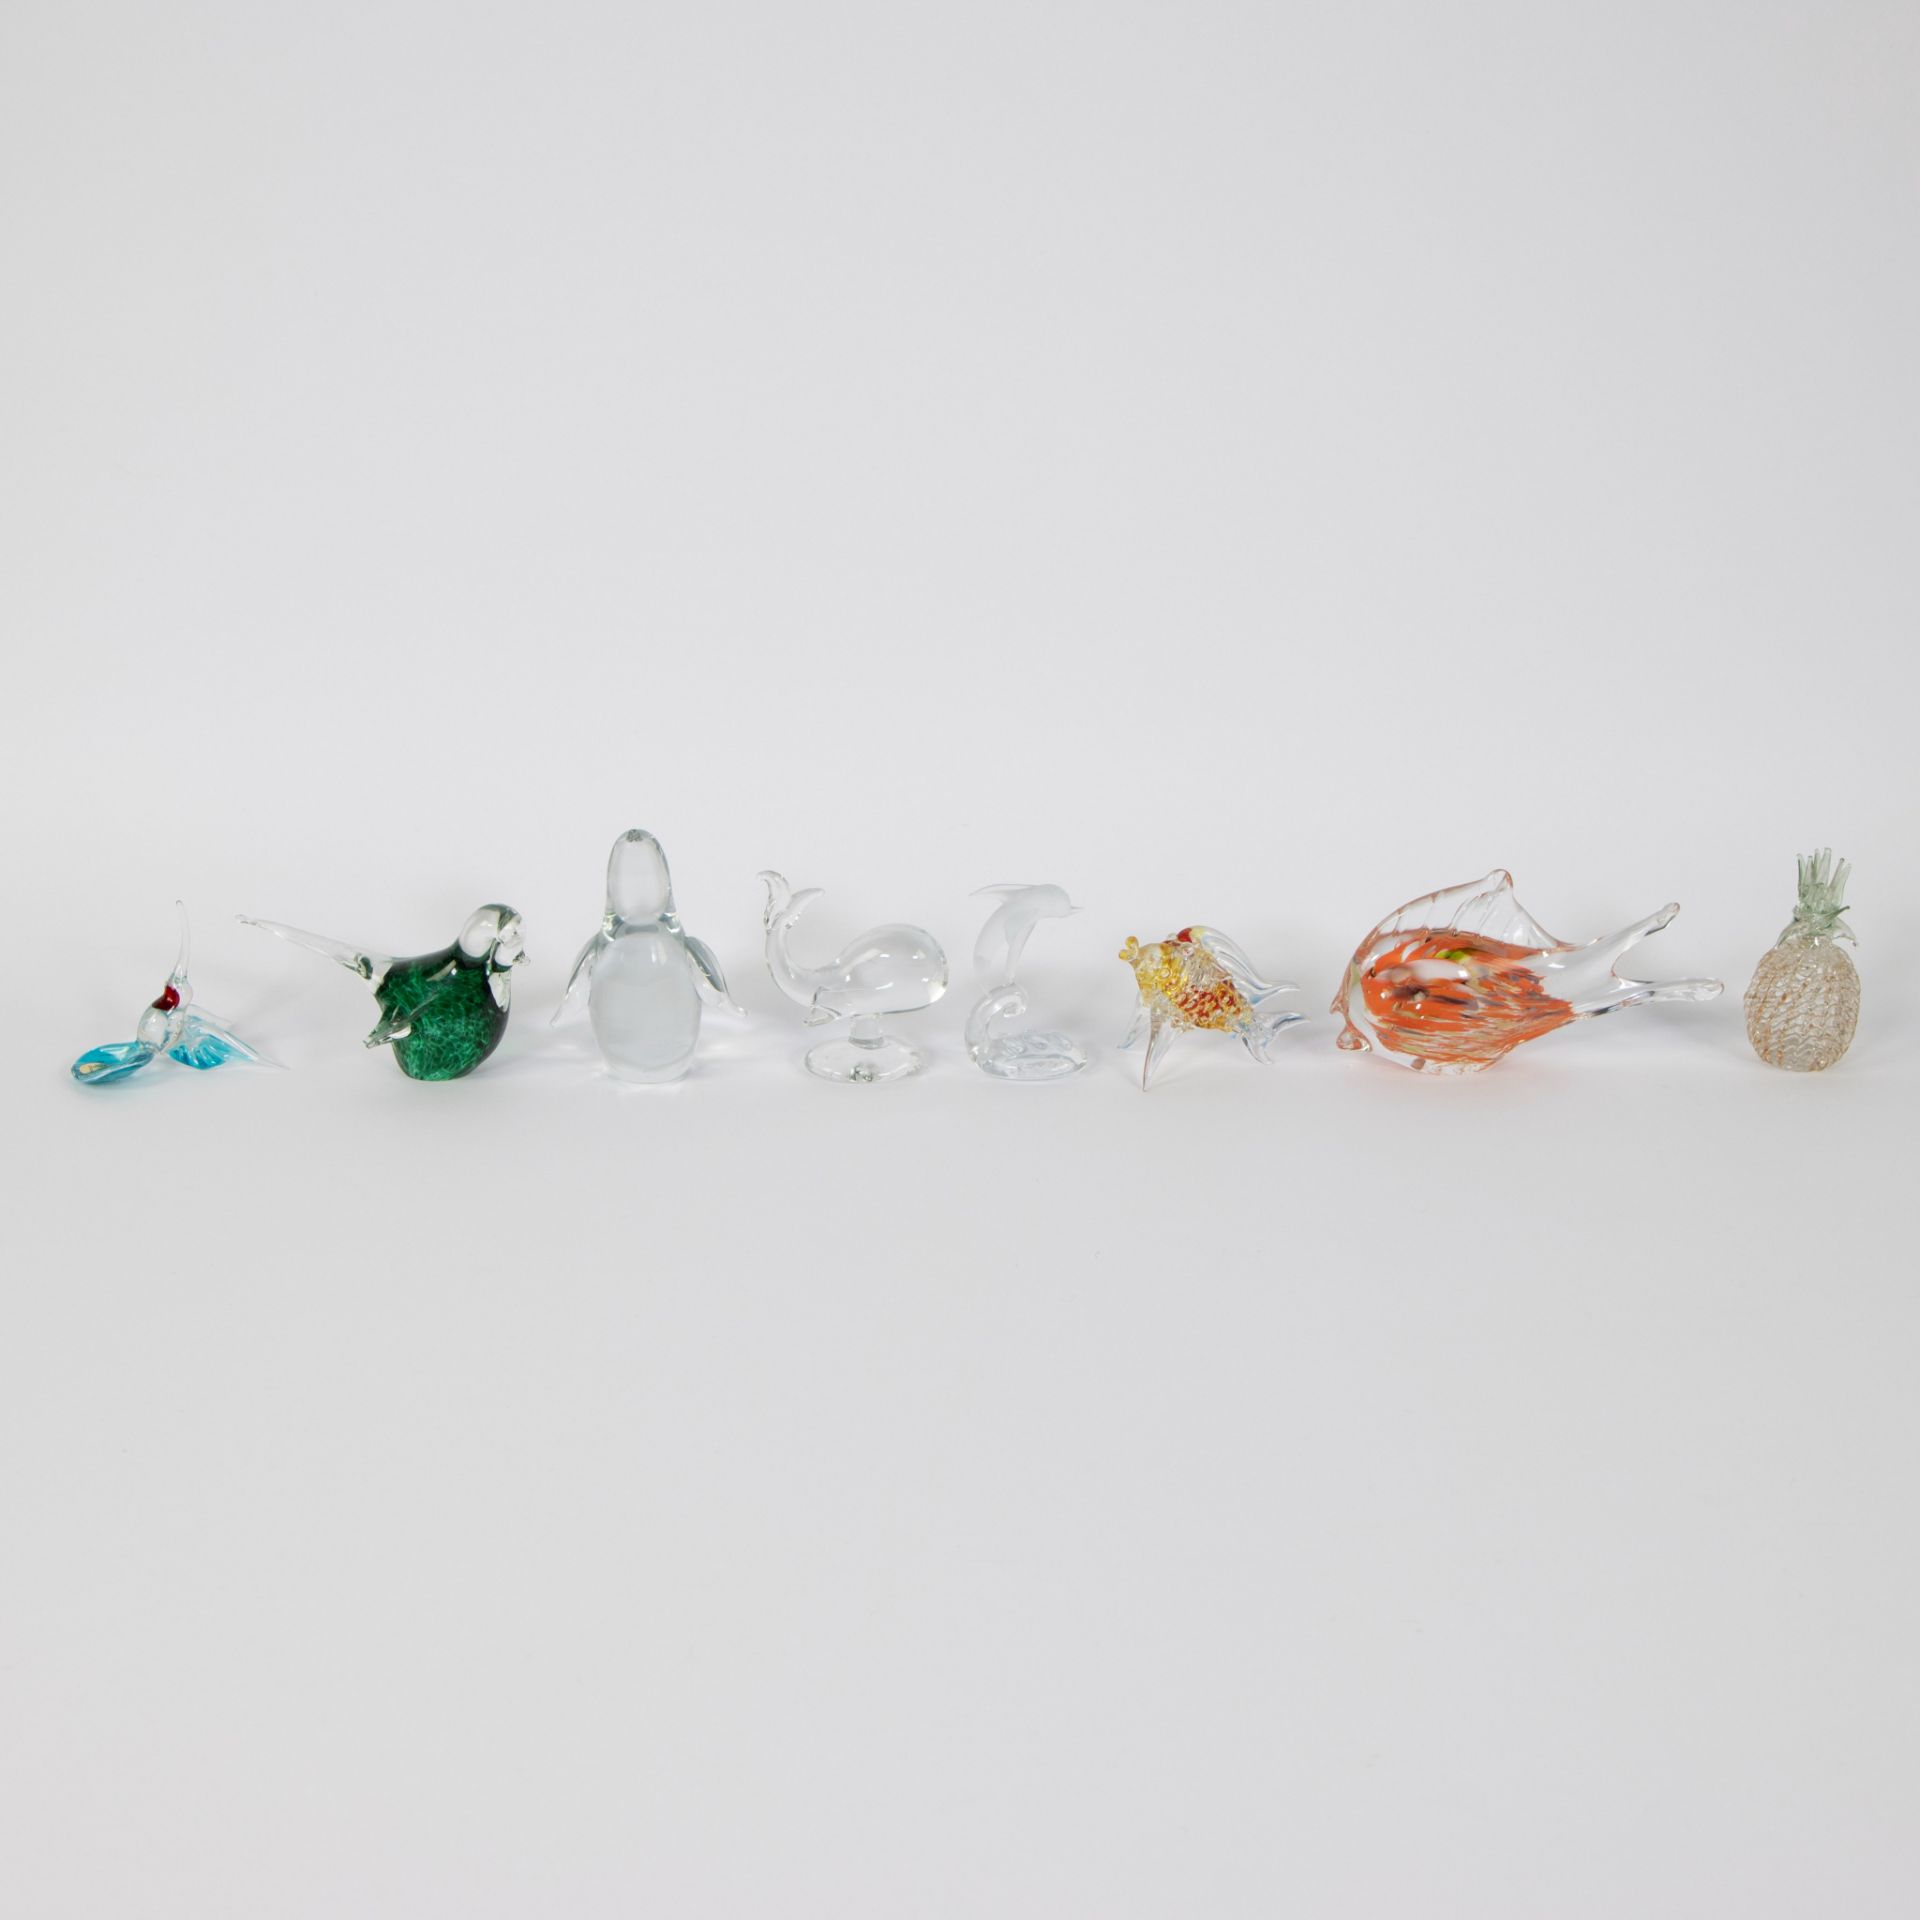 Lot of mouth-blown glass animals, MURANO - Image 4 of 5